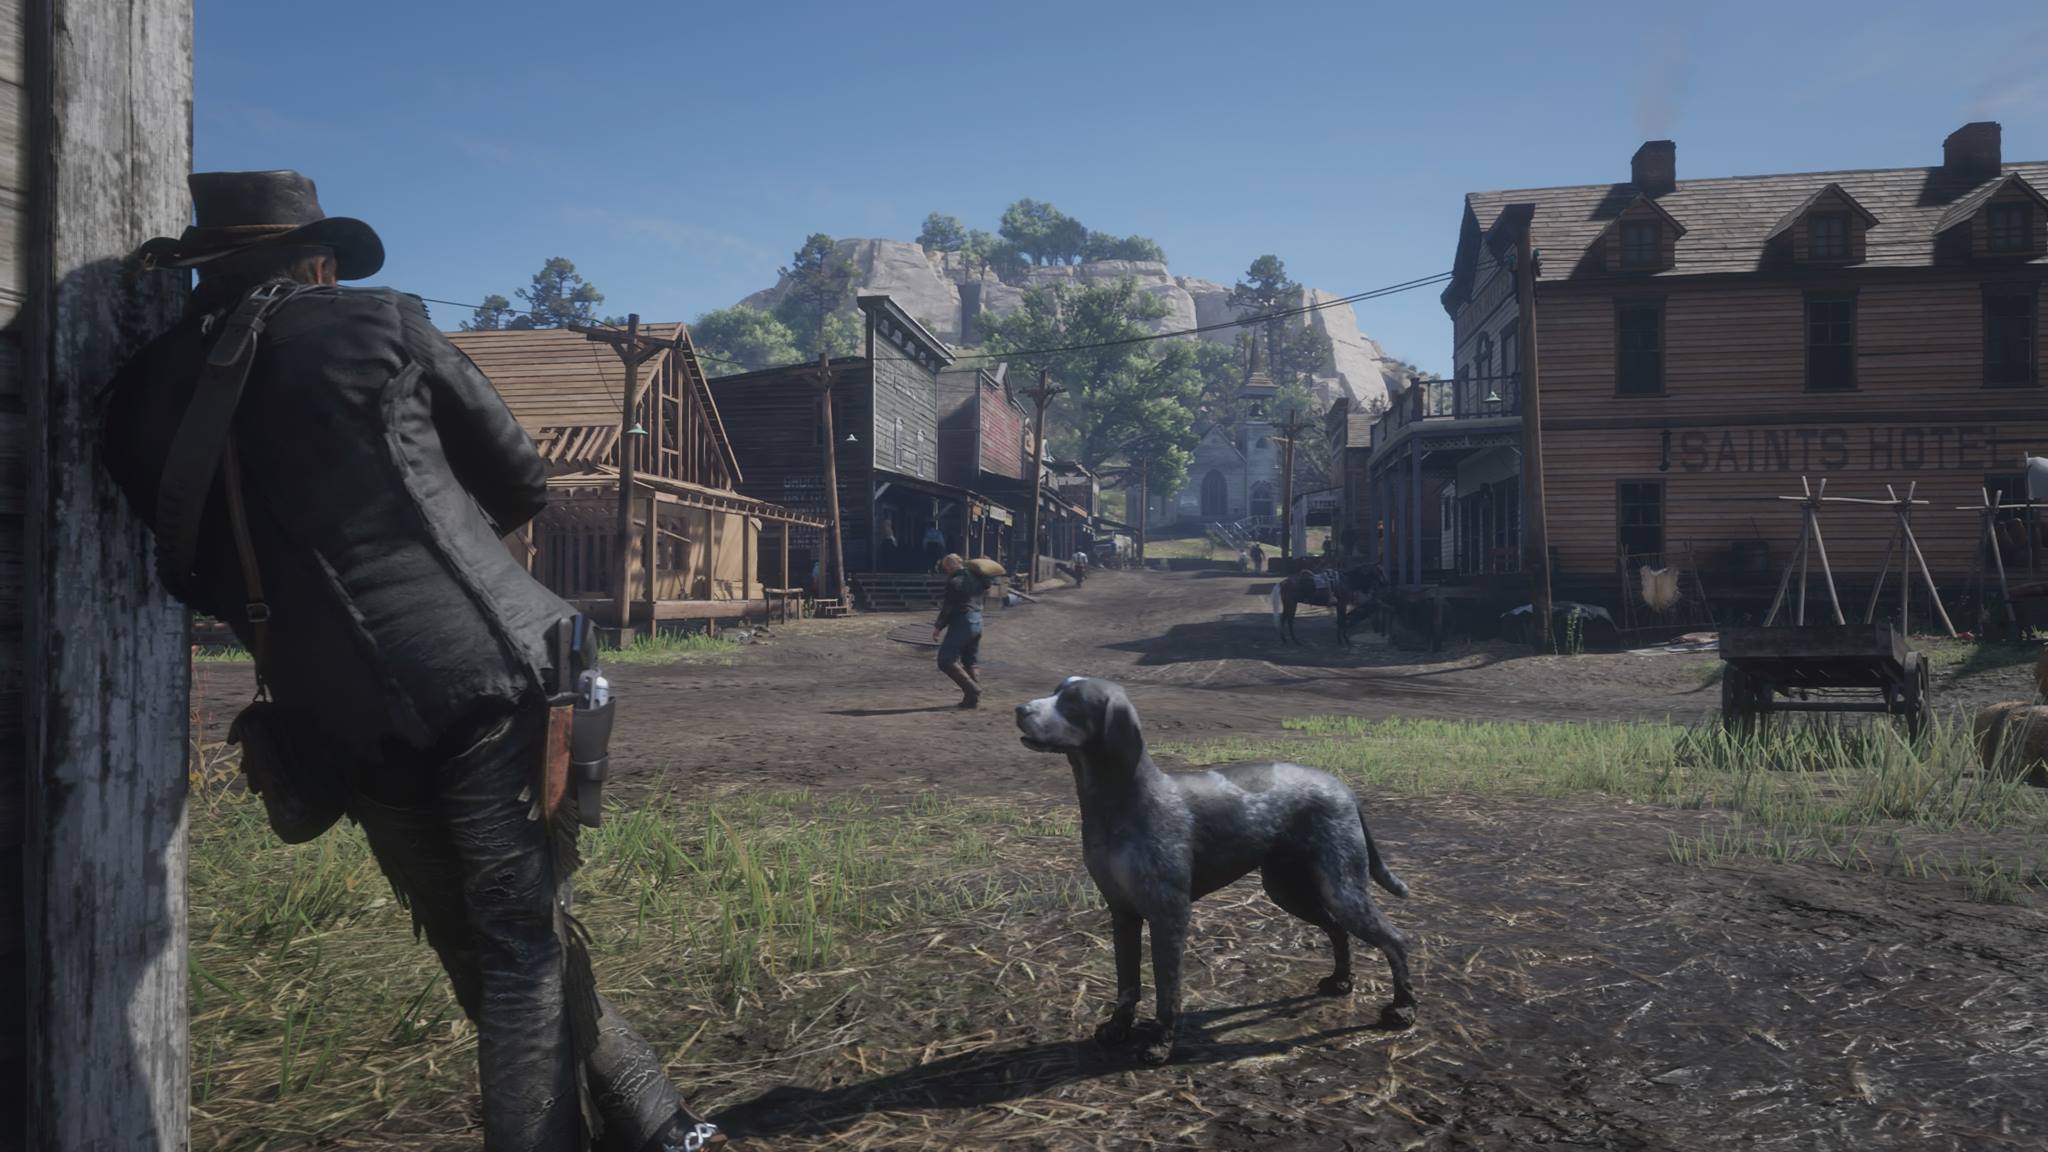 Red Dead Redemption 2 Online beta access: How to get RDR2 Online beta -  release schedule for PS4 nd XBox - Mirror Online